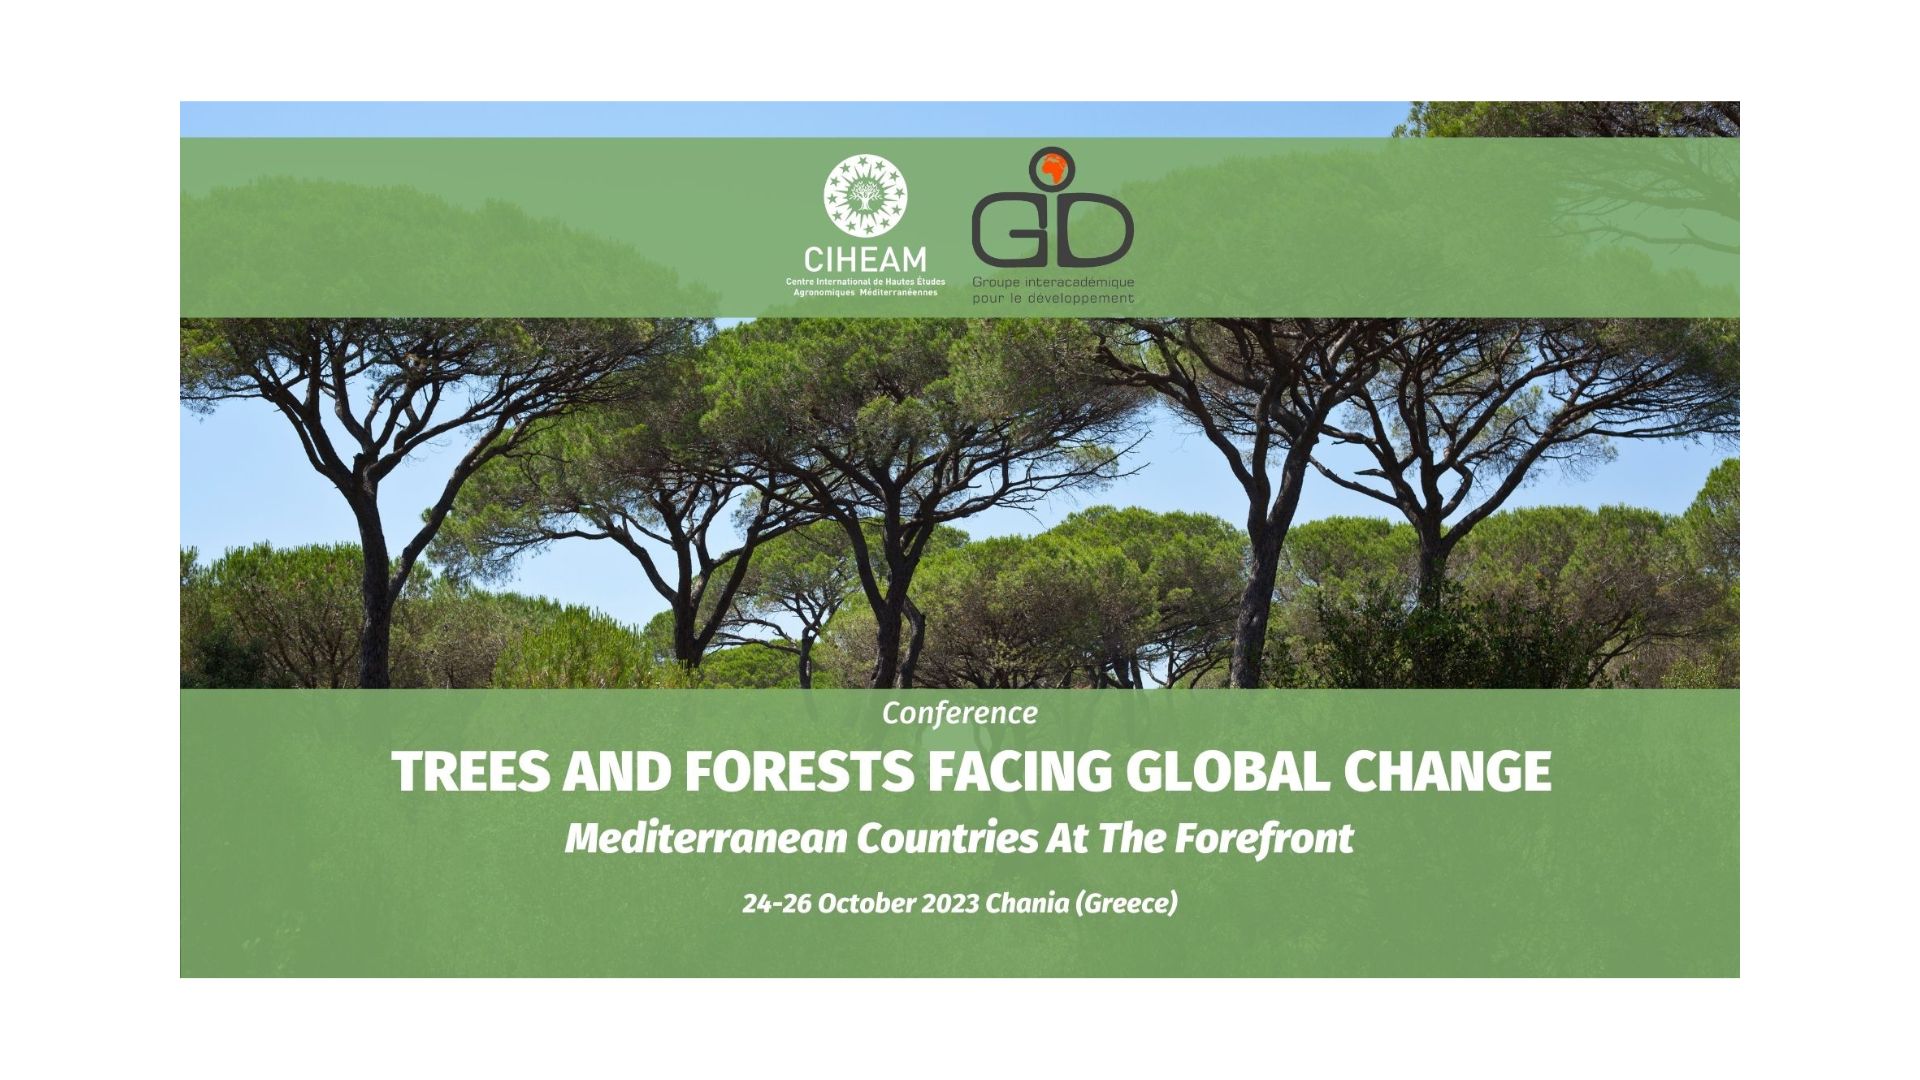 Trees and forests facing global change: Mediterranean Countries At The Forefront